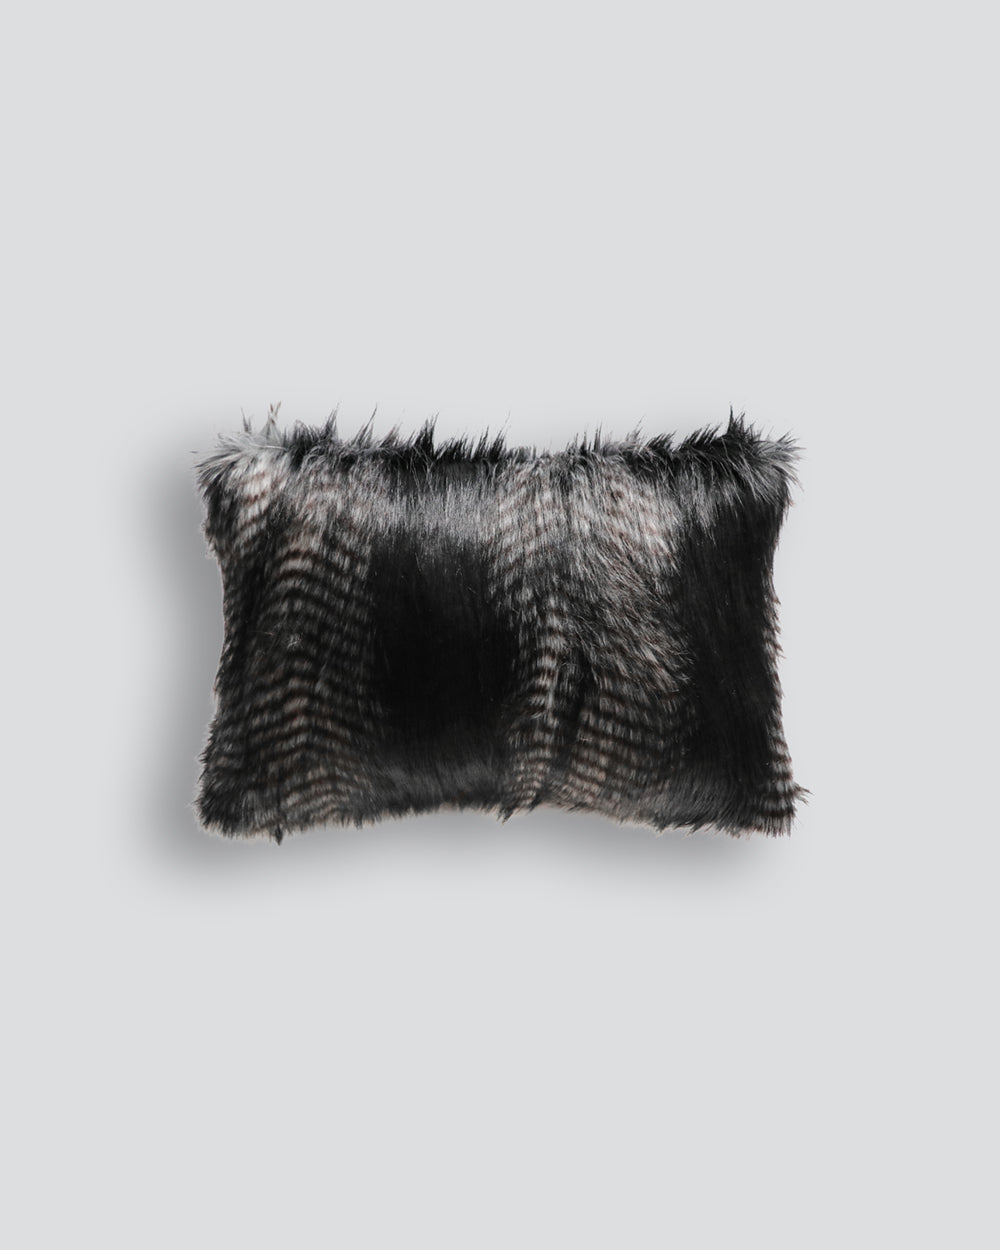 Heirloom Black Coyote Cushions in Faux Fur are available from Make Your House A Home Premium Stockist. Furniture Store Bendigo, Victoria. Australia Wide Delivery. Furtex Baya.